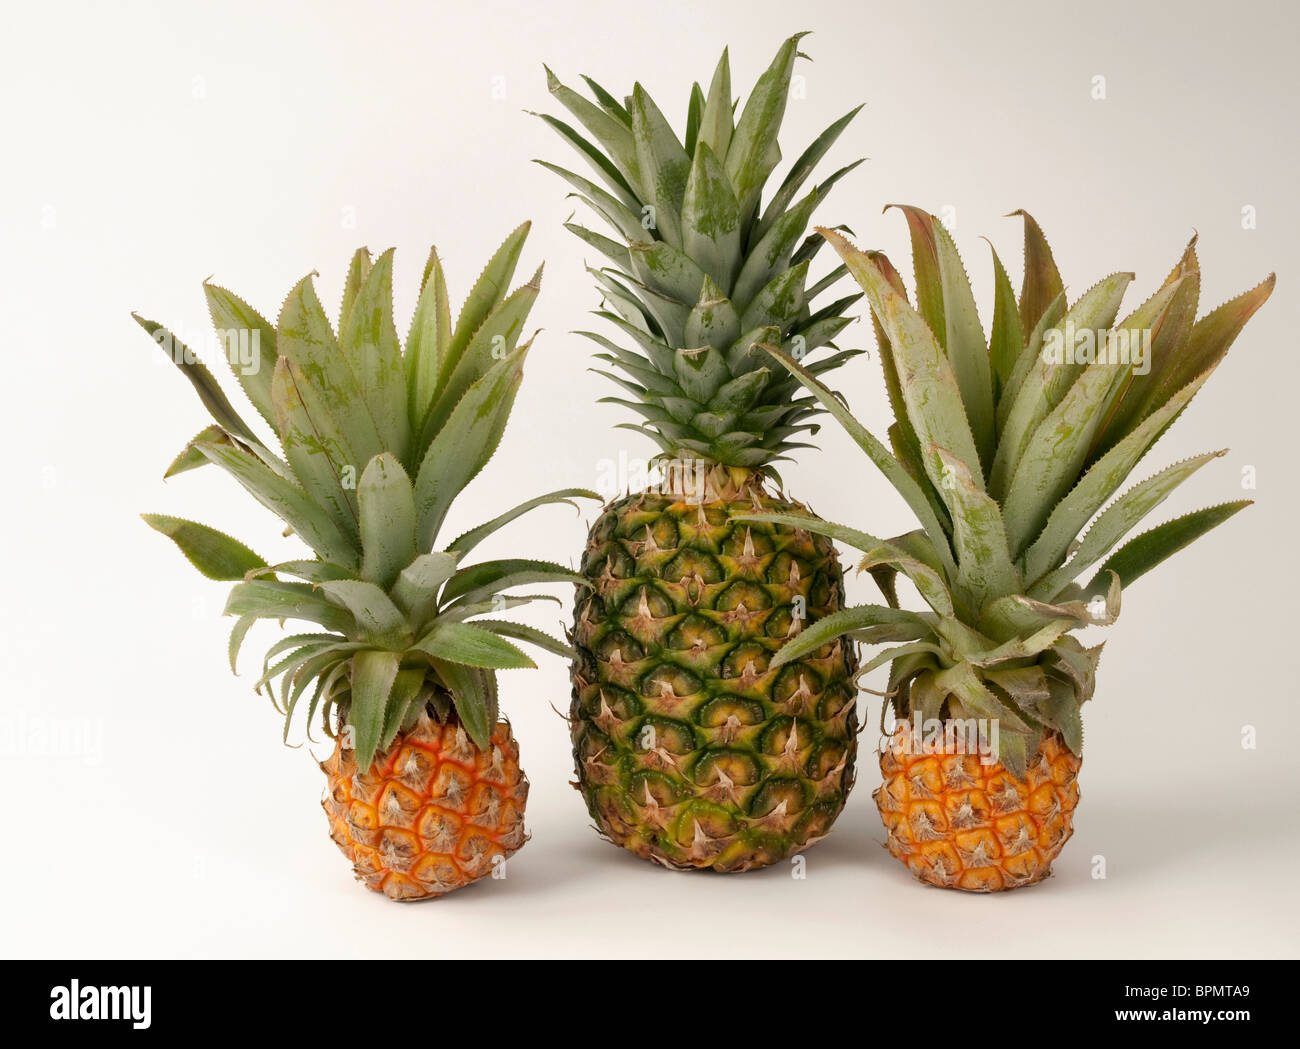 Pineapple (Ananas comosus). Normal seized fruit and mini pineapples, studio picture against a white background. Stock Photo